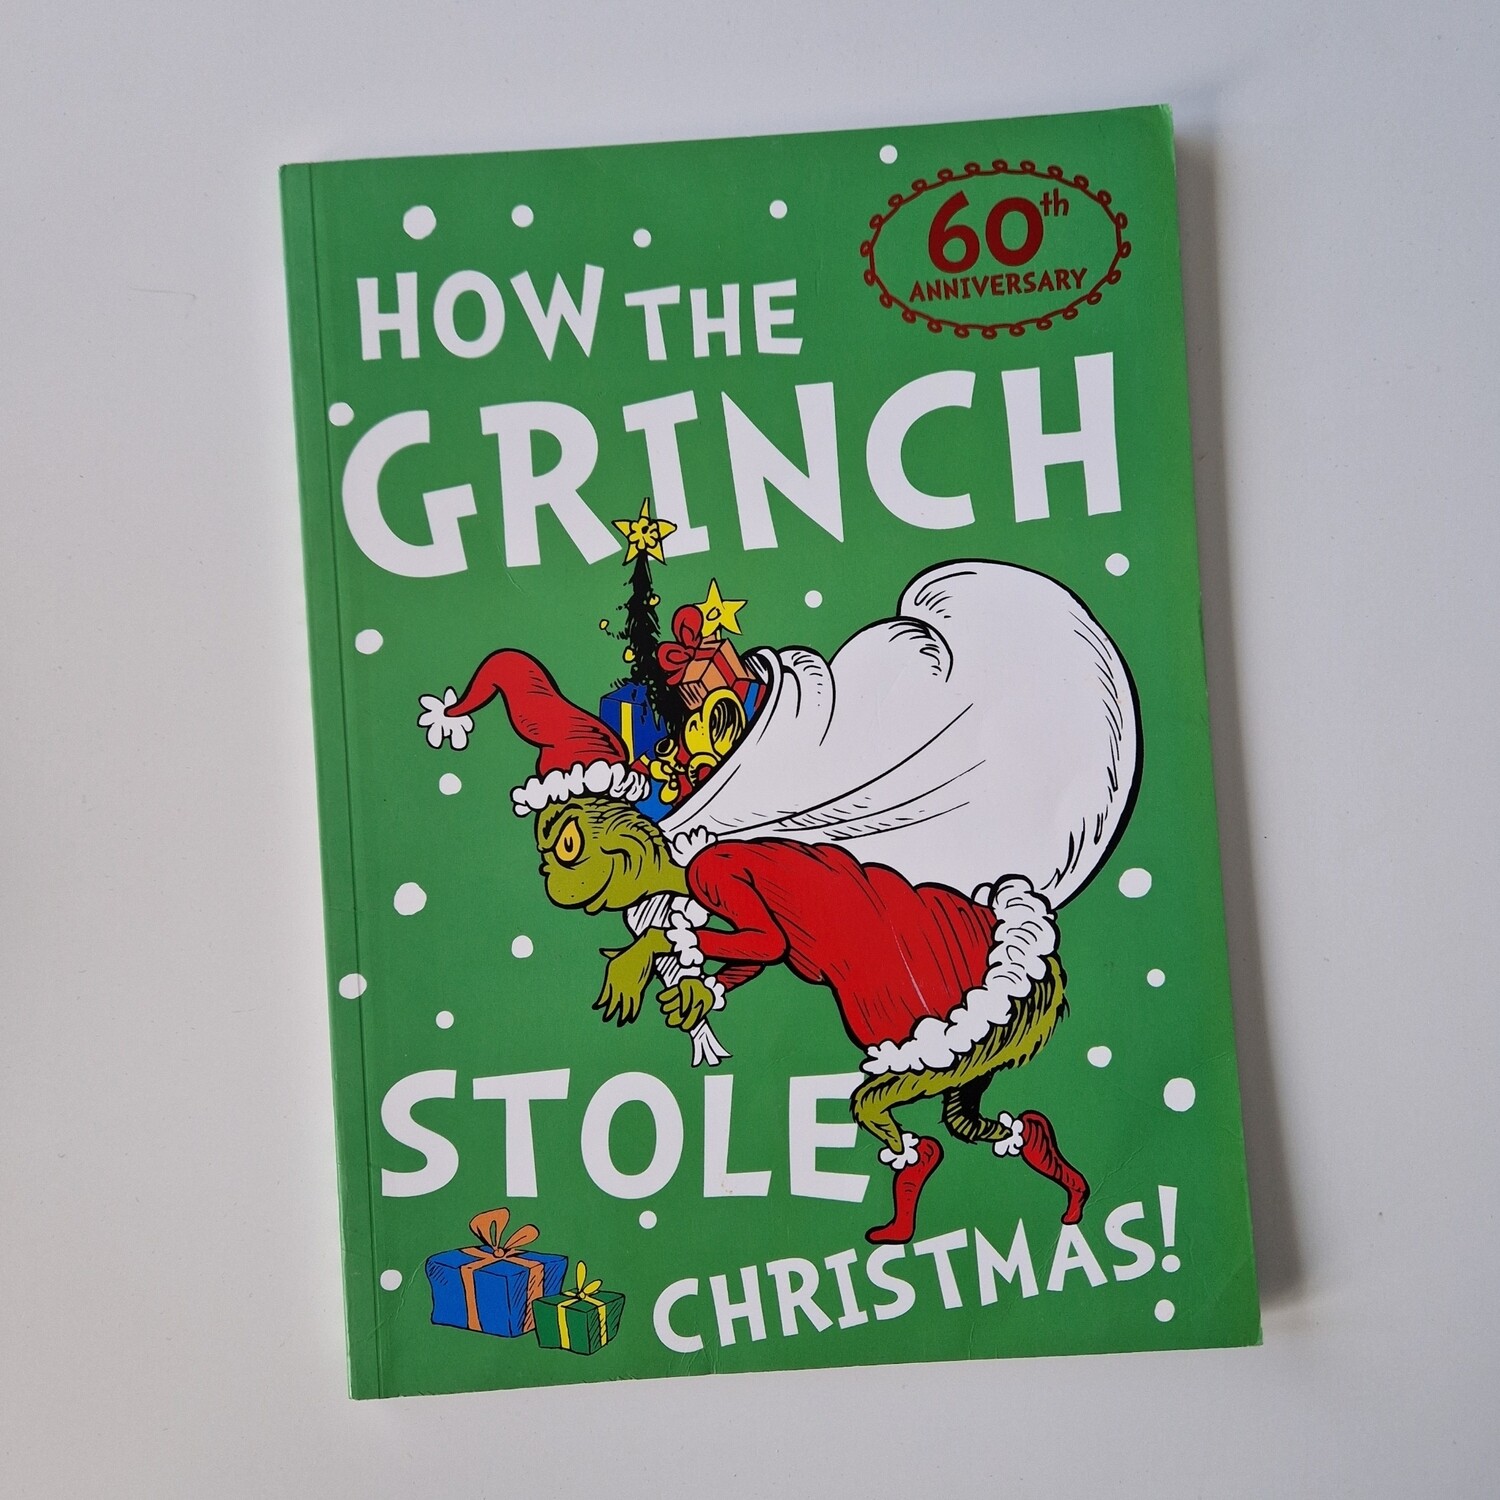 How the Grinch Stole Christmas Notebook - made from a paperback book - comes with metal book corners